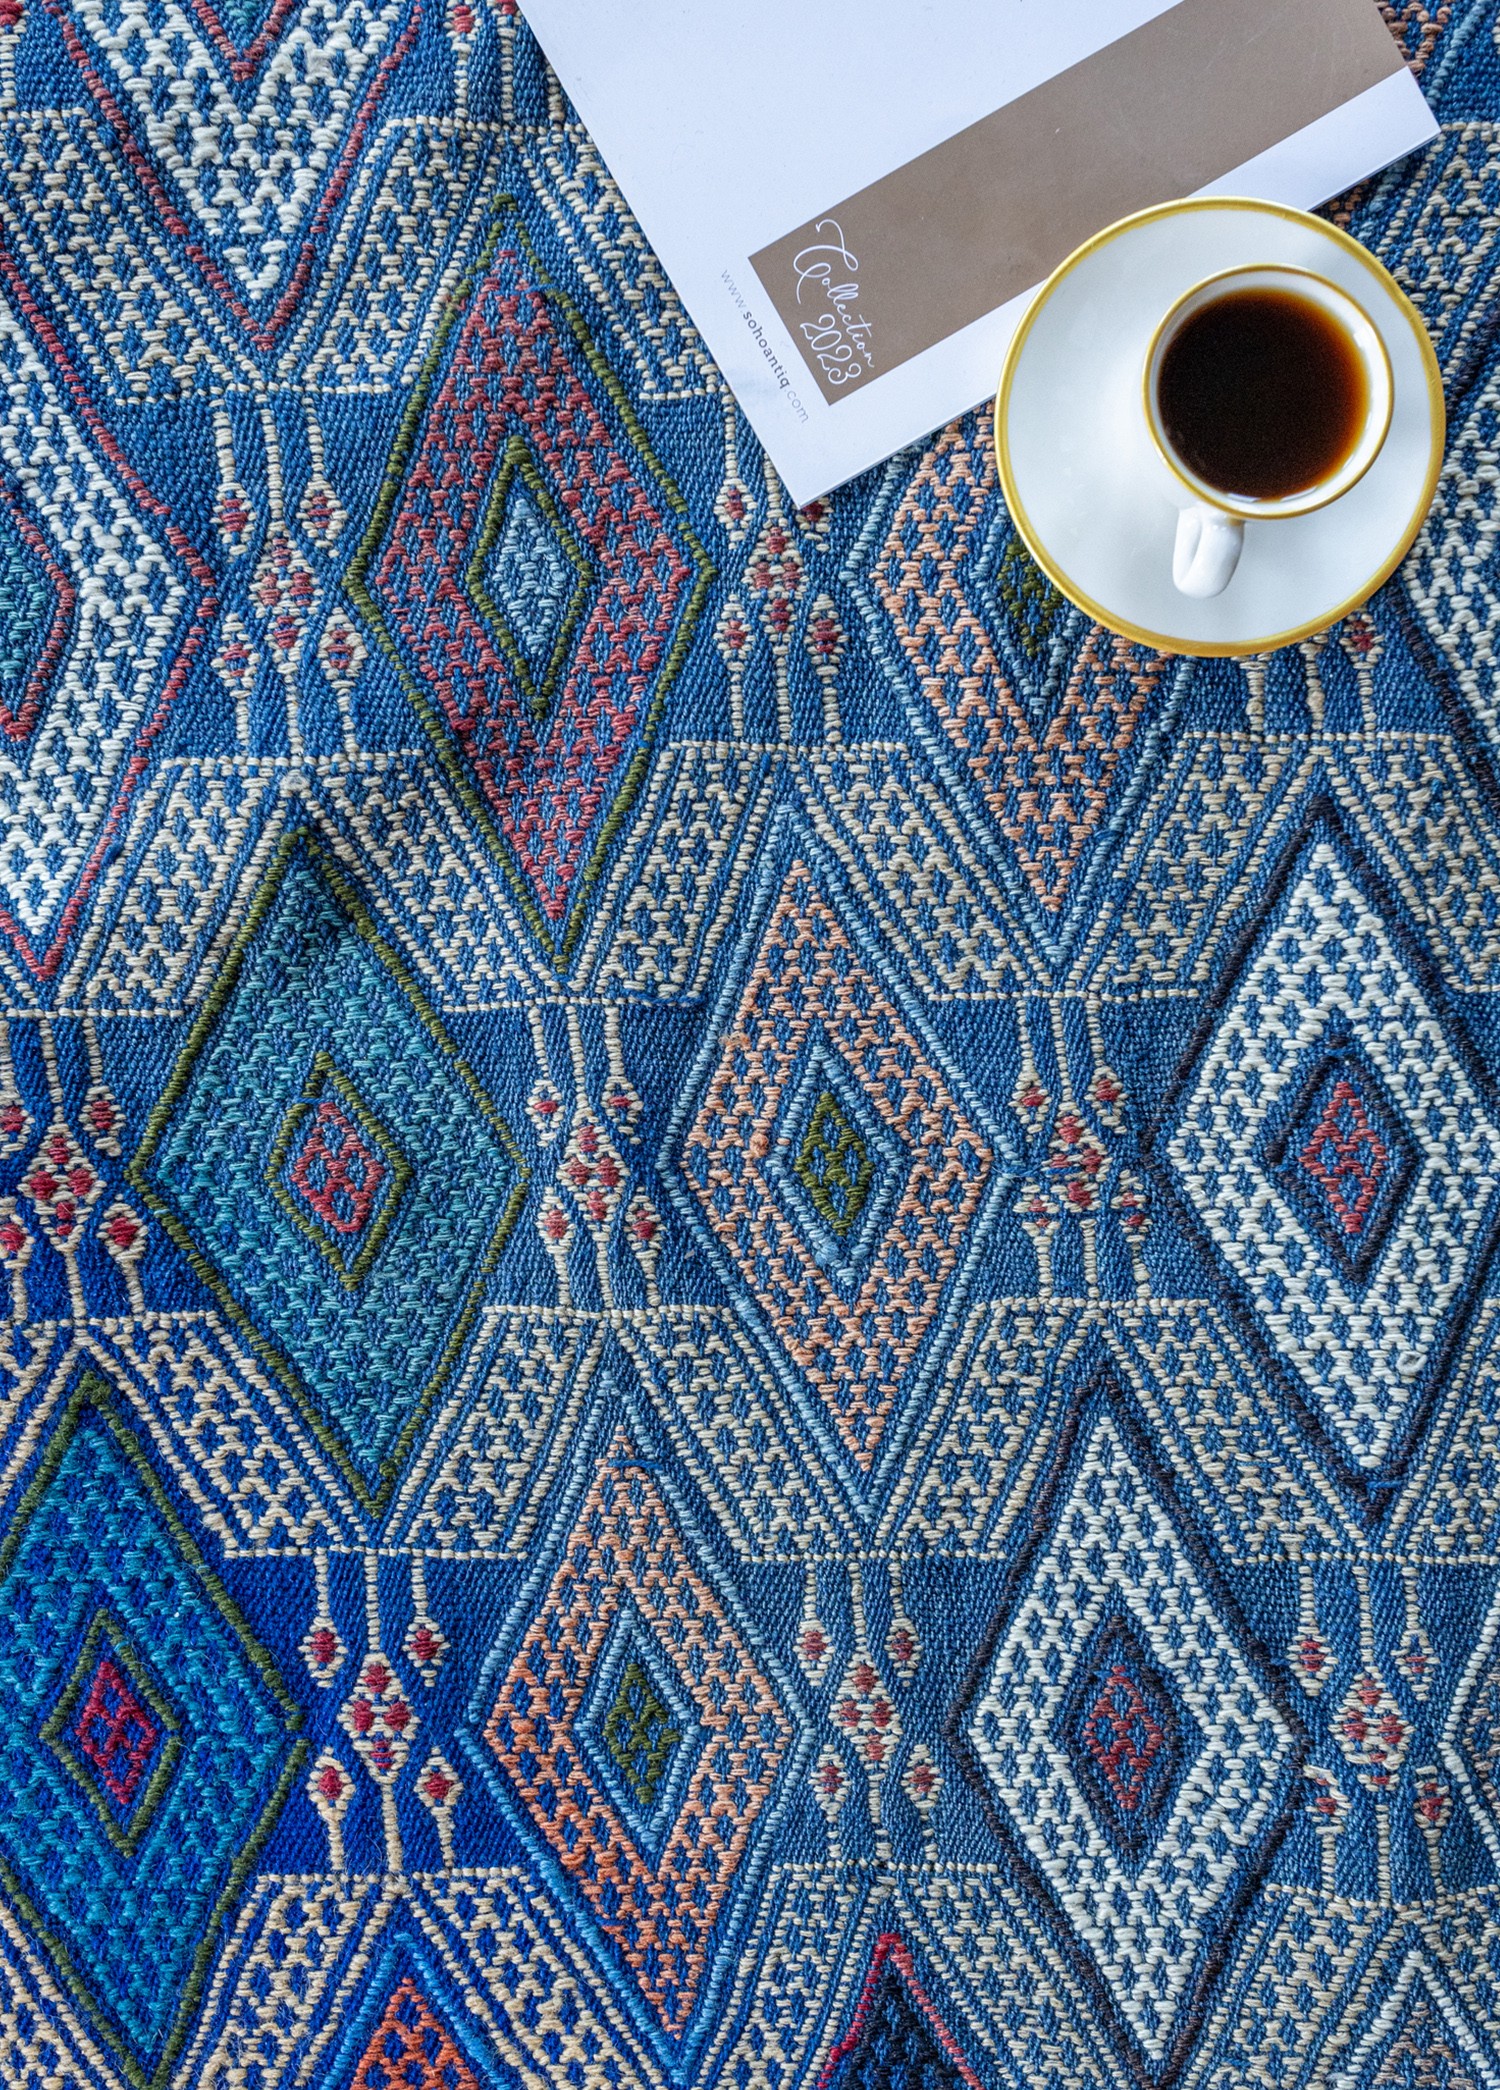 How to Identify Handwoven Kilims?